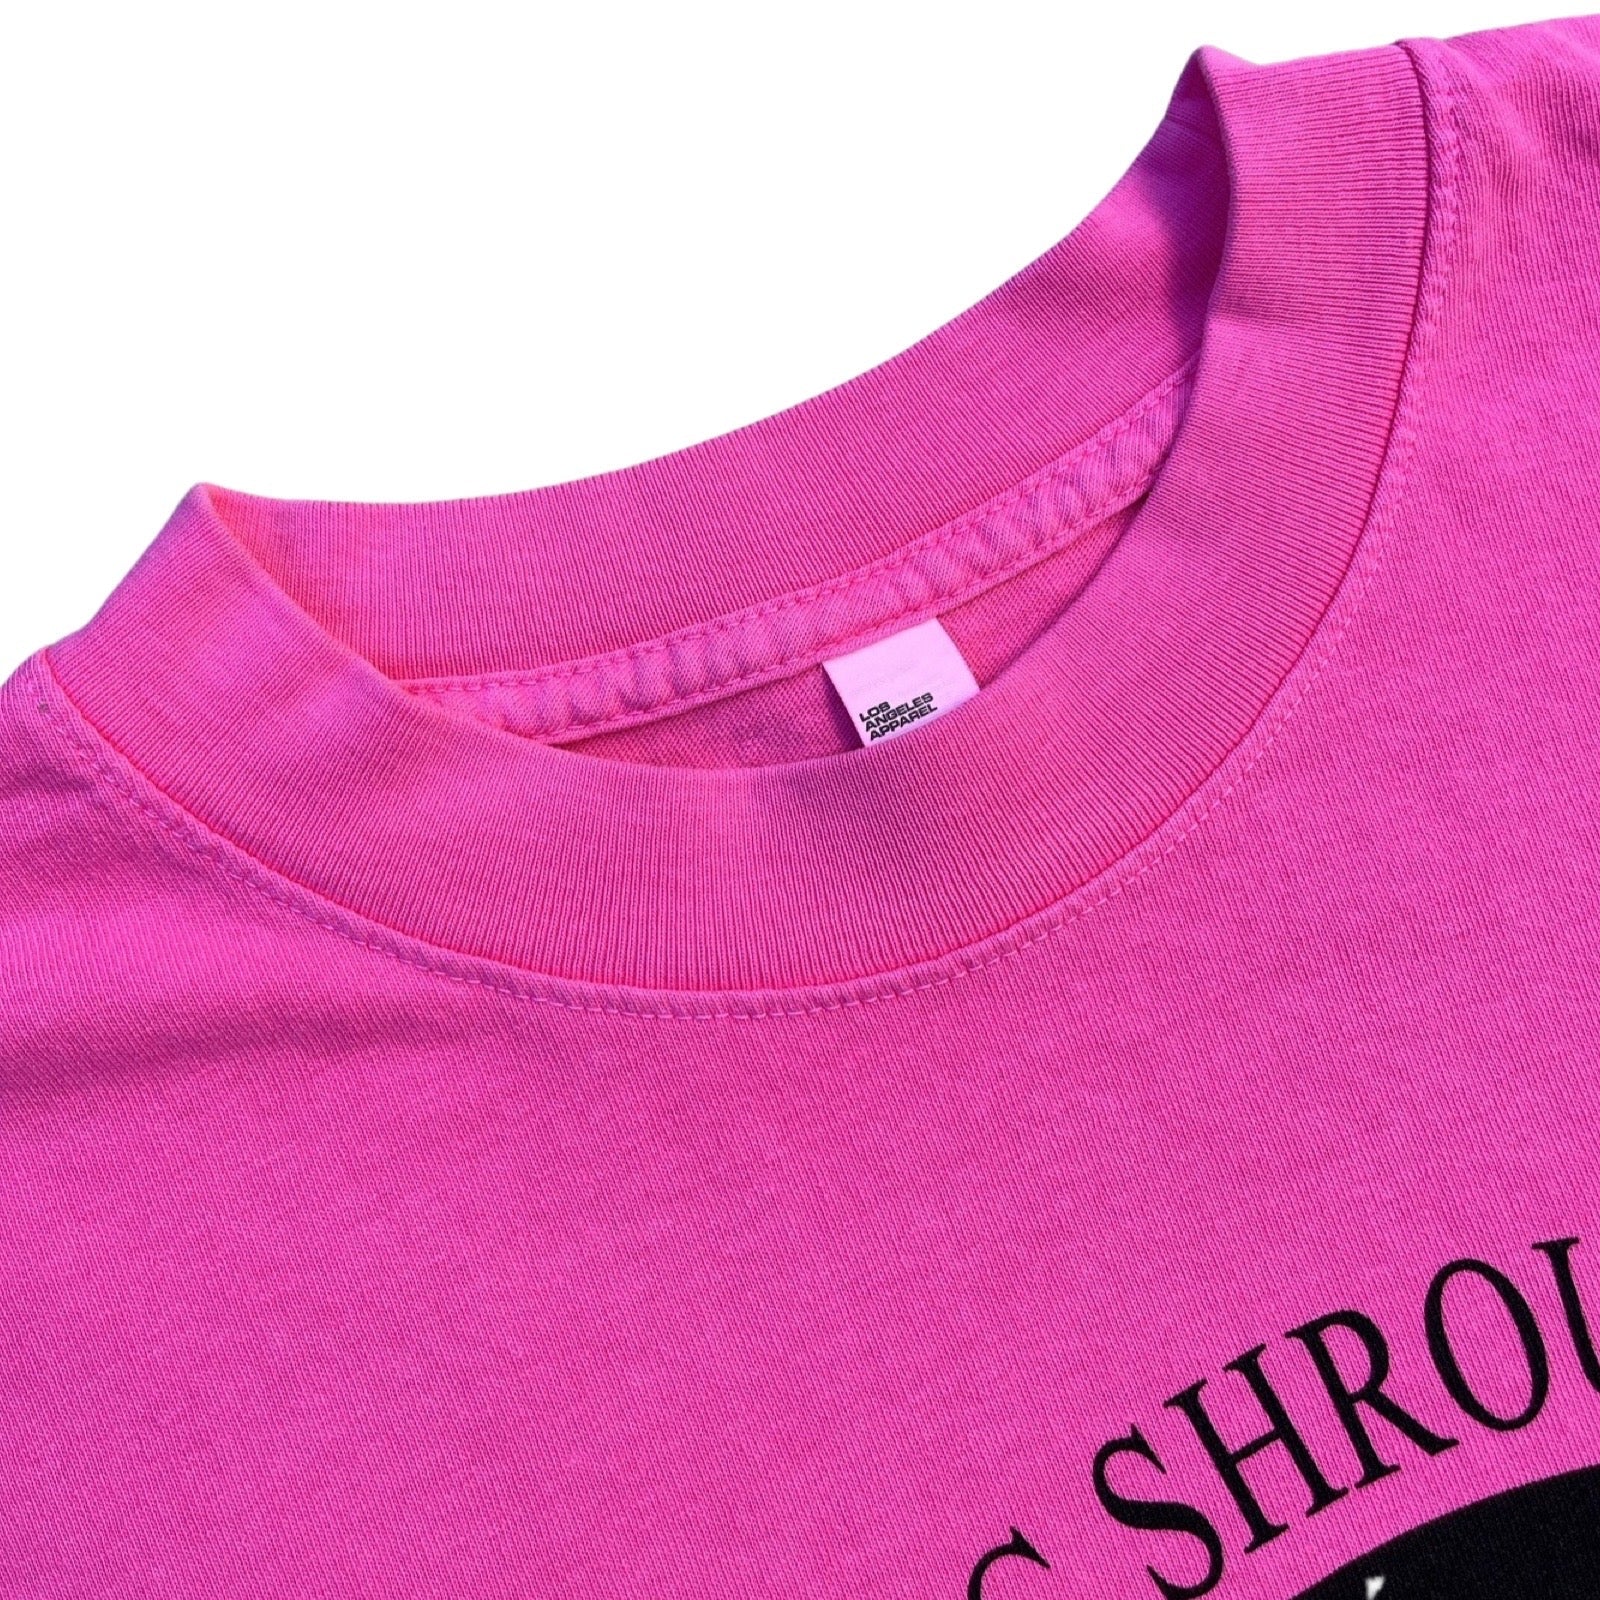 death's dynamic shroud - Pink Tour T-Shirt - 100% Electronica Official Store (Photo 3)